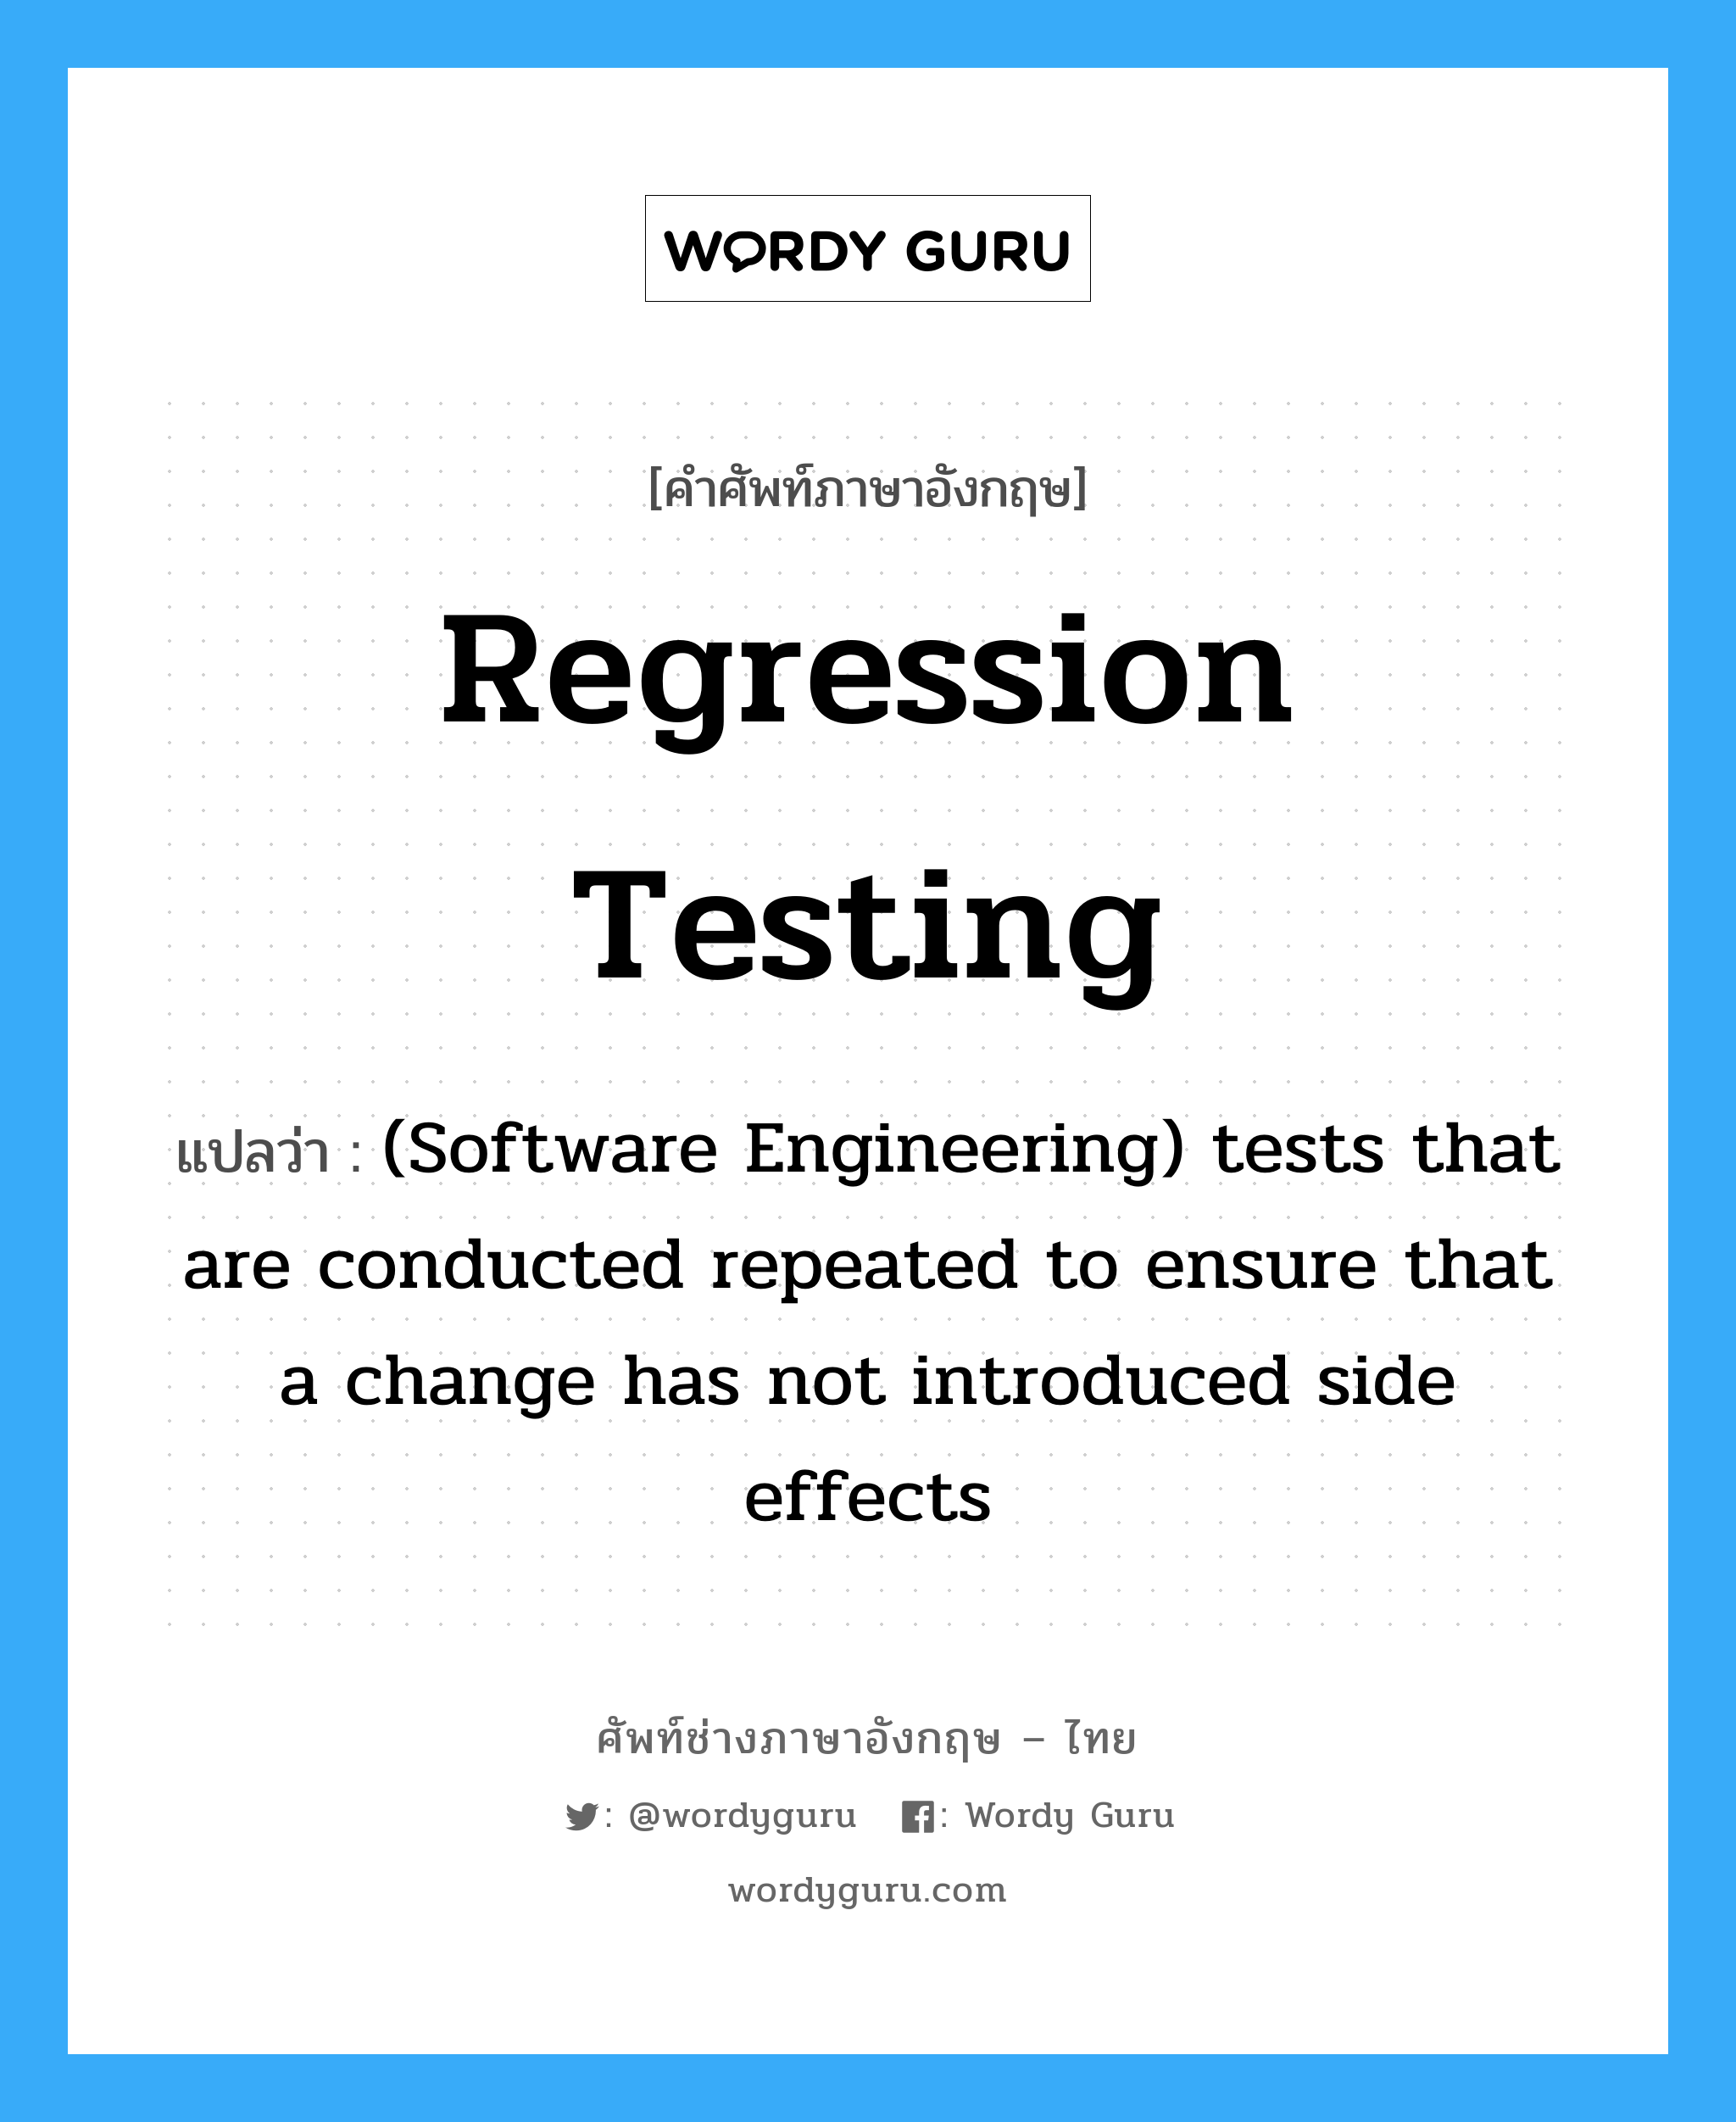 Regression testing แปลว่า?, คำศัพท์ช่างภาษาอังกฤษ - ไทย Regression testing คำศัพท์ภาษาอังกฤษ Regression testing แปลว่า (Software Engineering) tests that are conducted repeated to ensure that a change has not introduced side effects